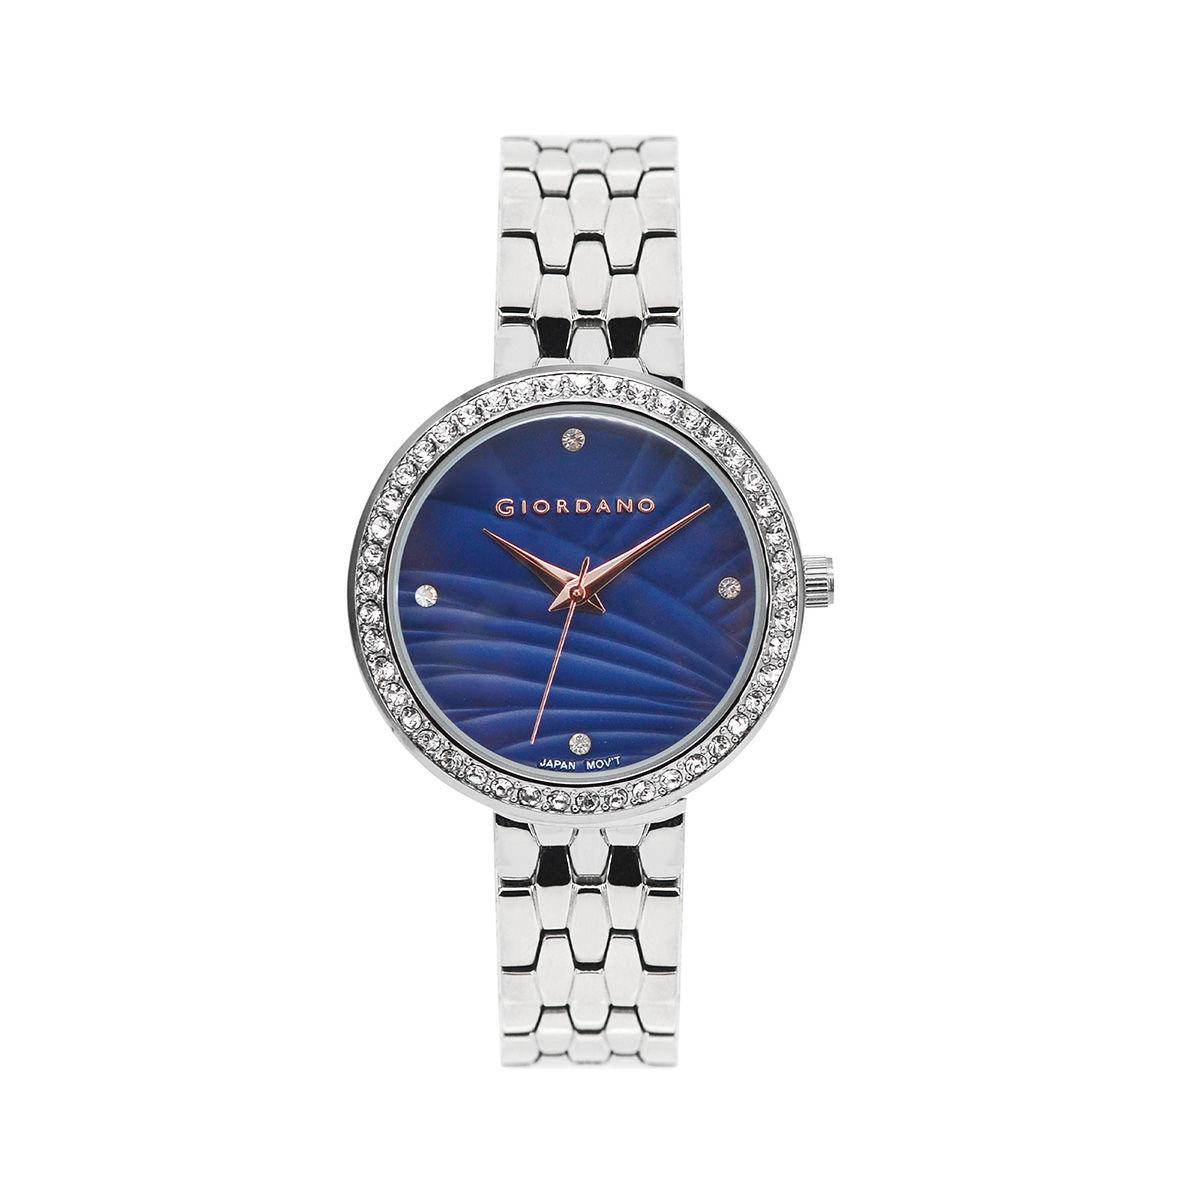 Buy - GIORDANO Women's Analog Blue Dial Watch - GD-2202-11 On VPerfumes